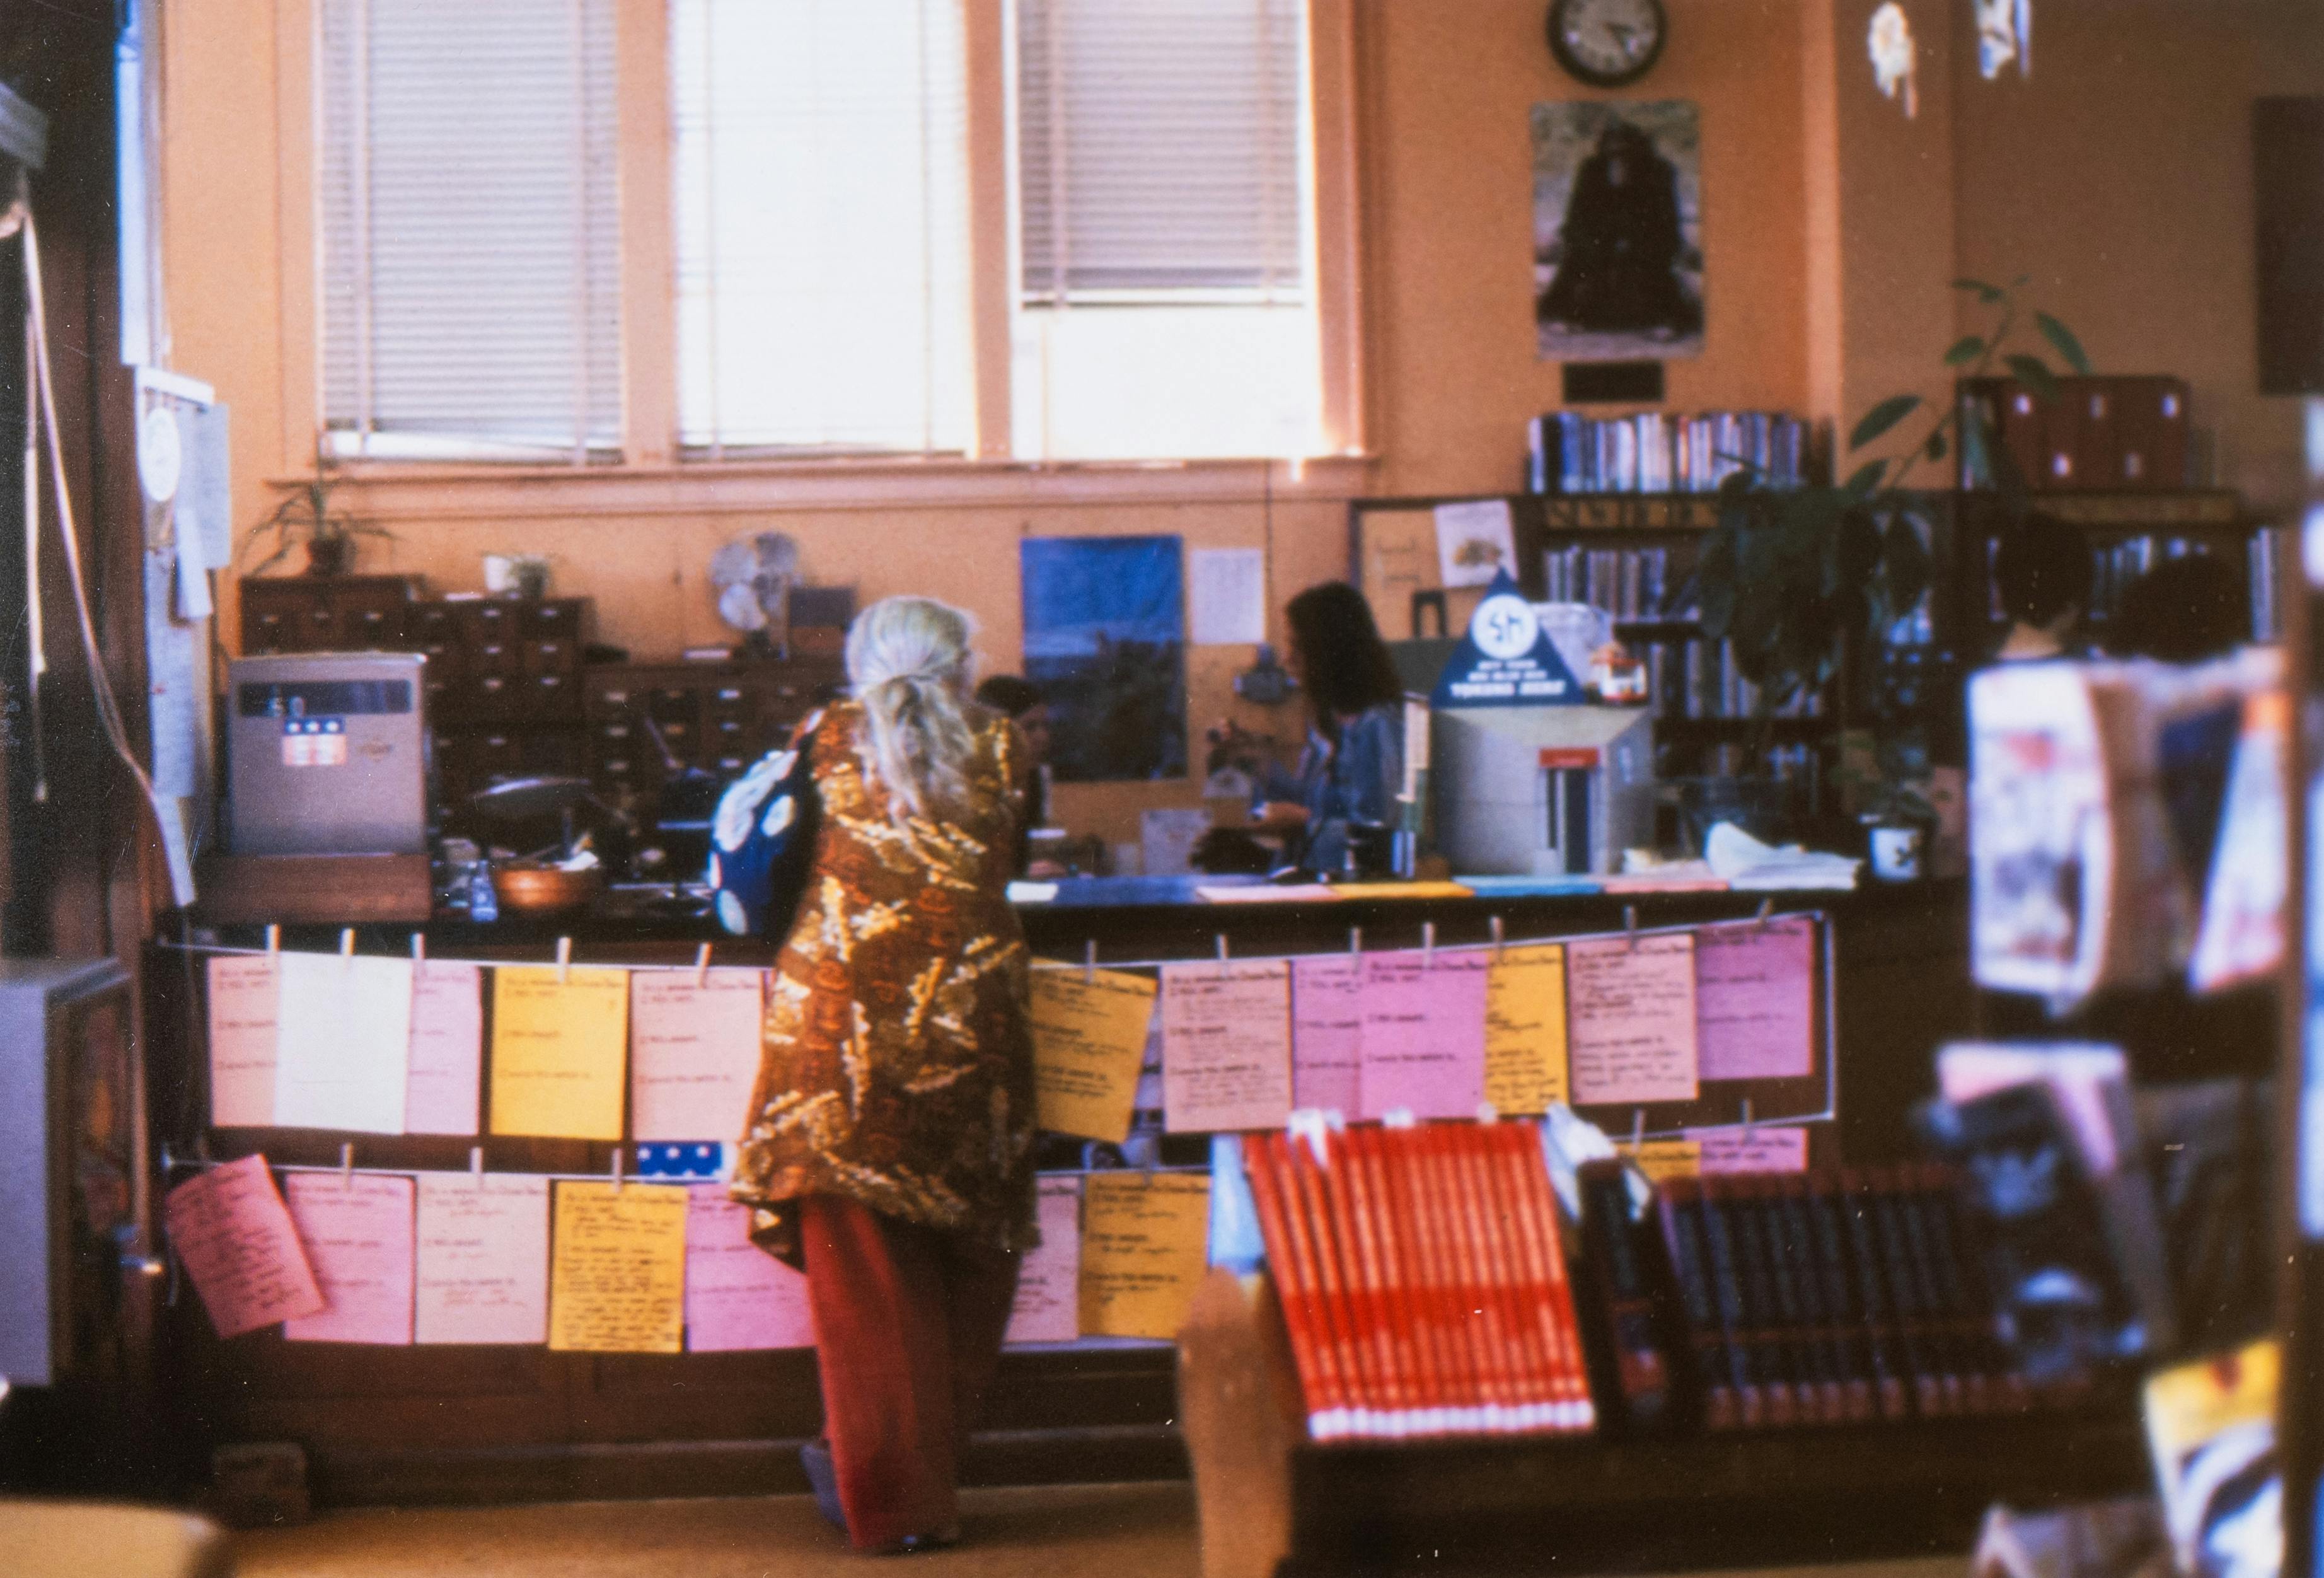 A color photograph of the interior of a bookstore, in which we can see a busy countertop with register, catalog card cases, and inventory. Suspended in two rows on the front face of the checkout counter are sheets of pink and orange paper with handwritten text hung from two clotheslines. A woman leans against the countertop, speaking to an attendant behind the counter. Her body partially obscures the sheets of paper.